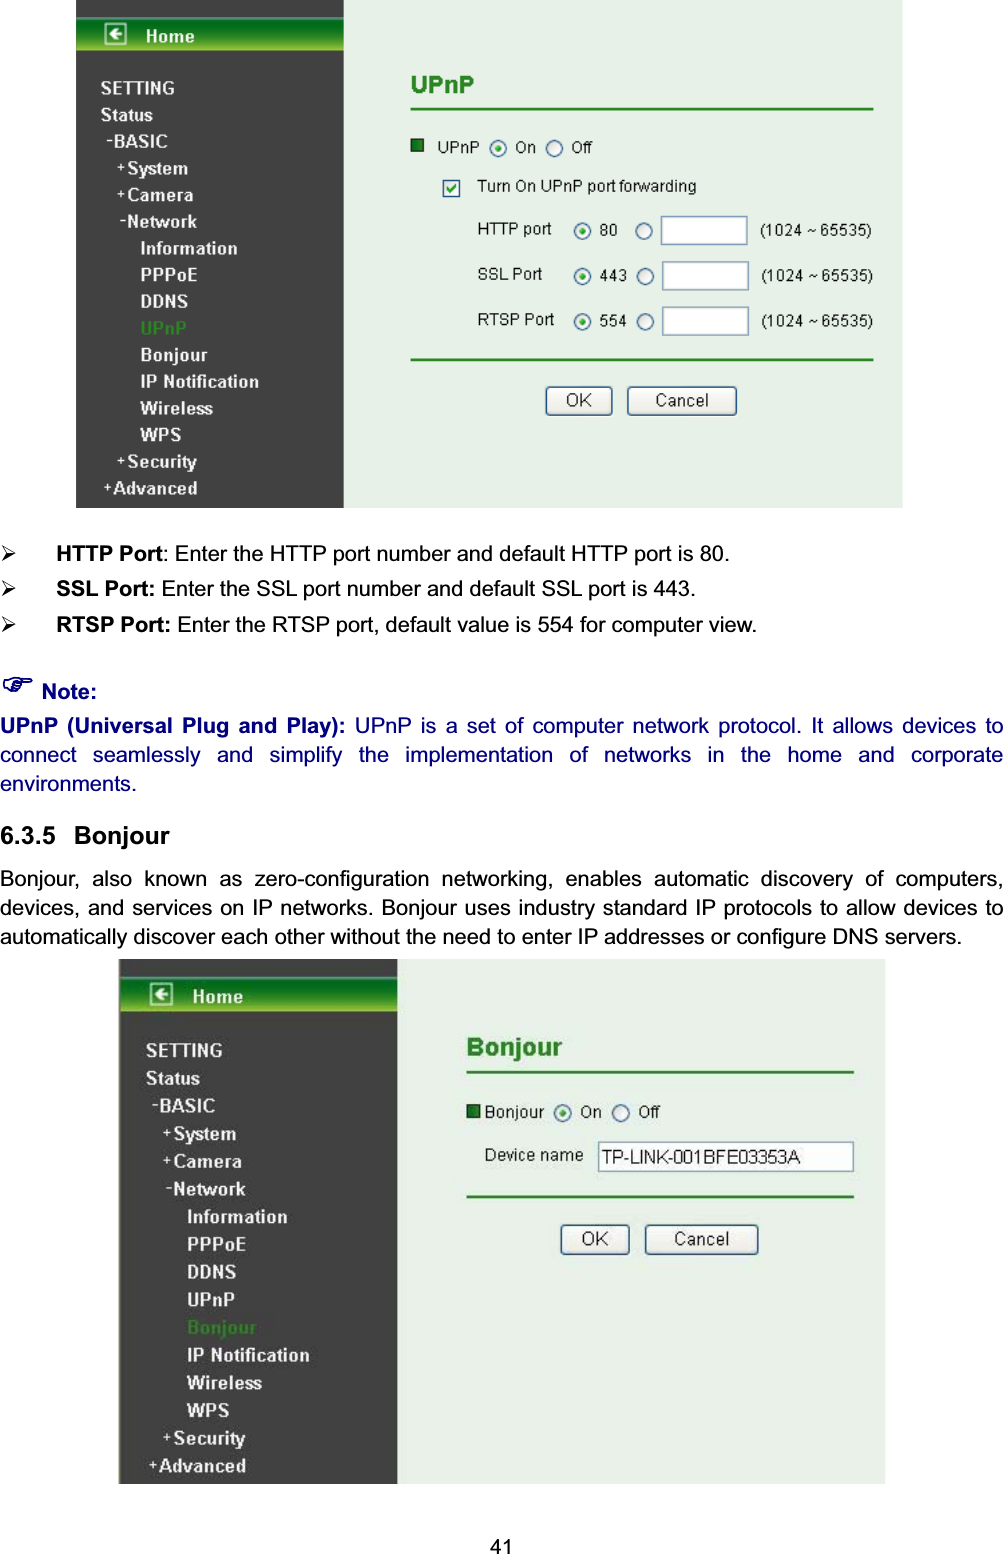   41 ¾ HTTP Port: Enter the HTTP port number and default HTTP port is 80. ¾ SSL Port: Enter the SSL port number and default SSL port is 443. ¾ RTSP Port: Enter the RTSP port, default value is 554 for computer view. ) Note: UPnP (Universal Plug and Play): UPnP is a set of computer network protocol. It allows devices to connect seamlessly and simplify the implementation of networks in the home and corporate environments.  6.3.5 Bonjour Bonjour, also known as zero-configuration networking, enables automatic discovery of computers, devices, and services on IP networks. Bonjour uses industry standard IP protocols to allow devices to automatically discover each other without the need to enter IP addresses or configure DNS servers.  